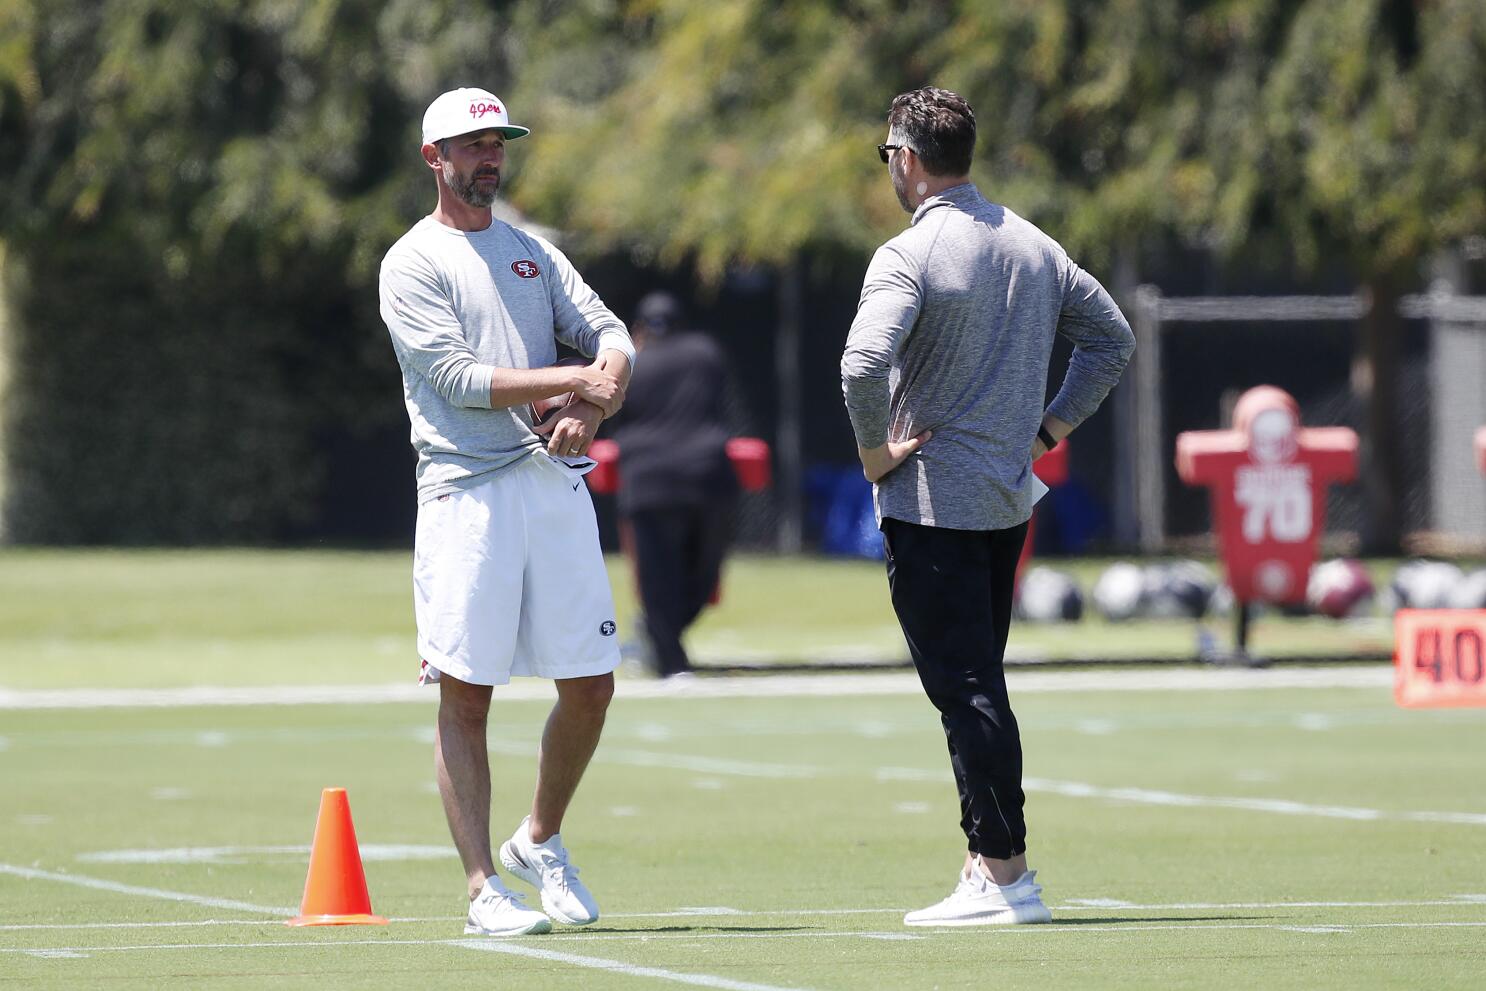 49ers cut short offseason program after injuries - The San Diego